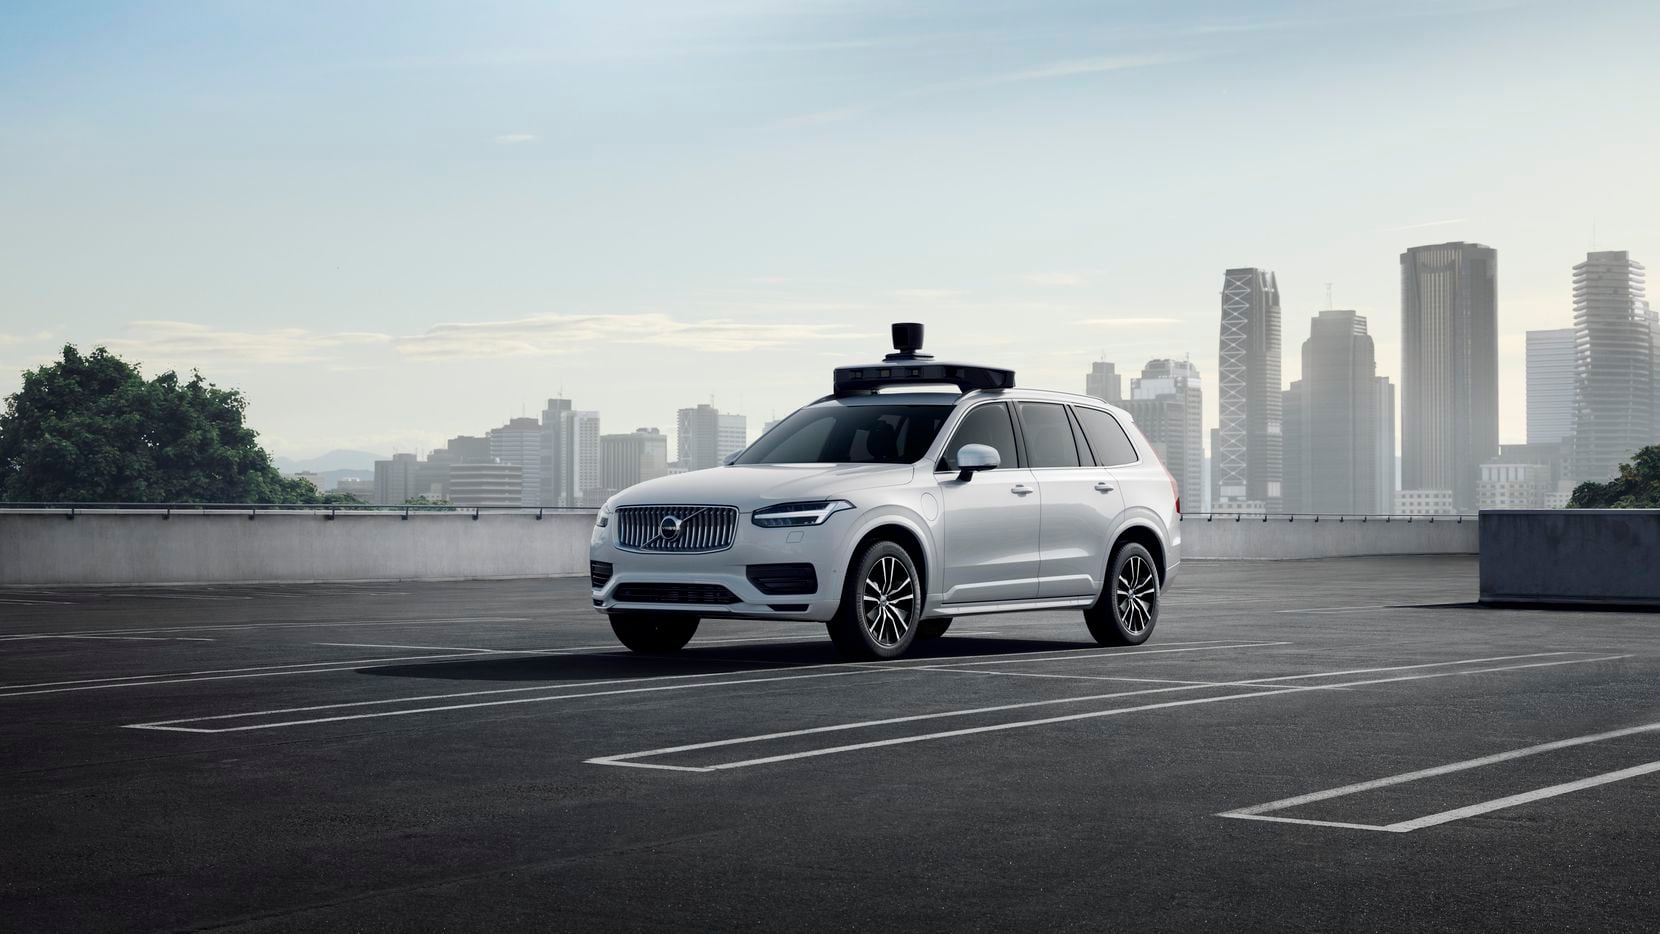 Uber's white Volvo SUVs will start mapping downtown Dallas streets this fall to understand...